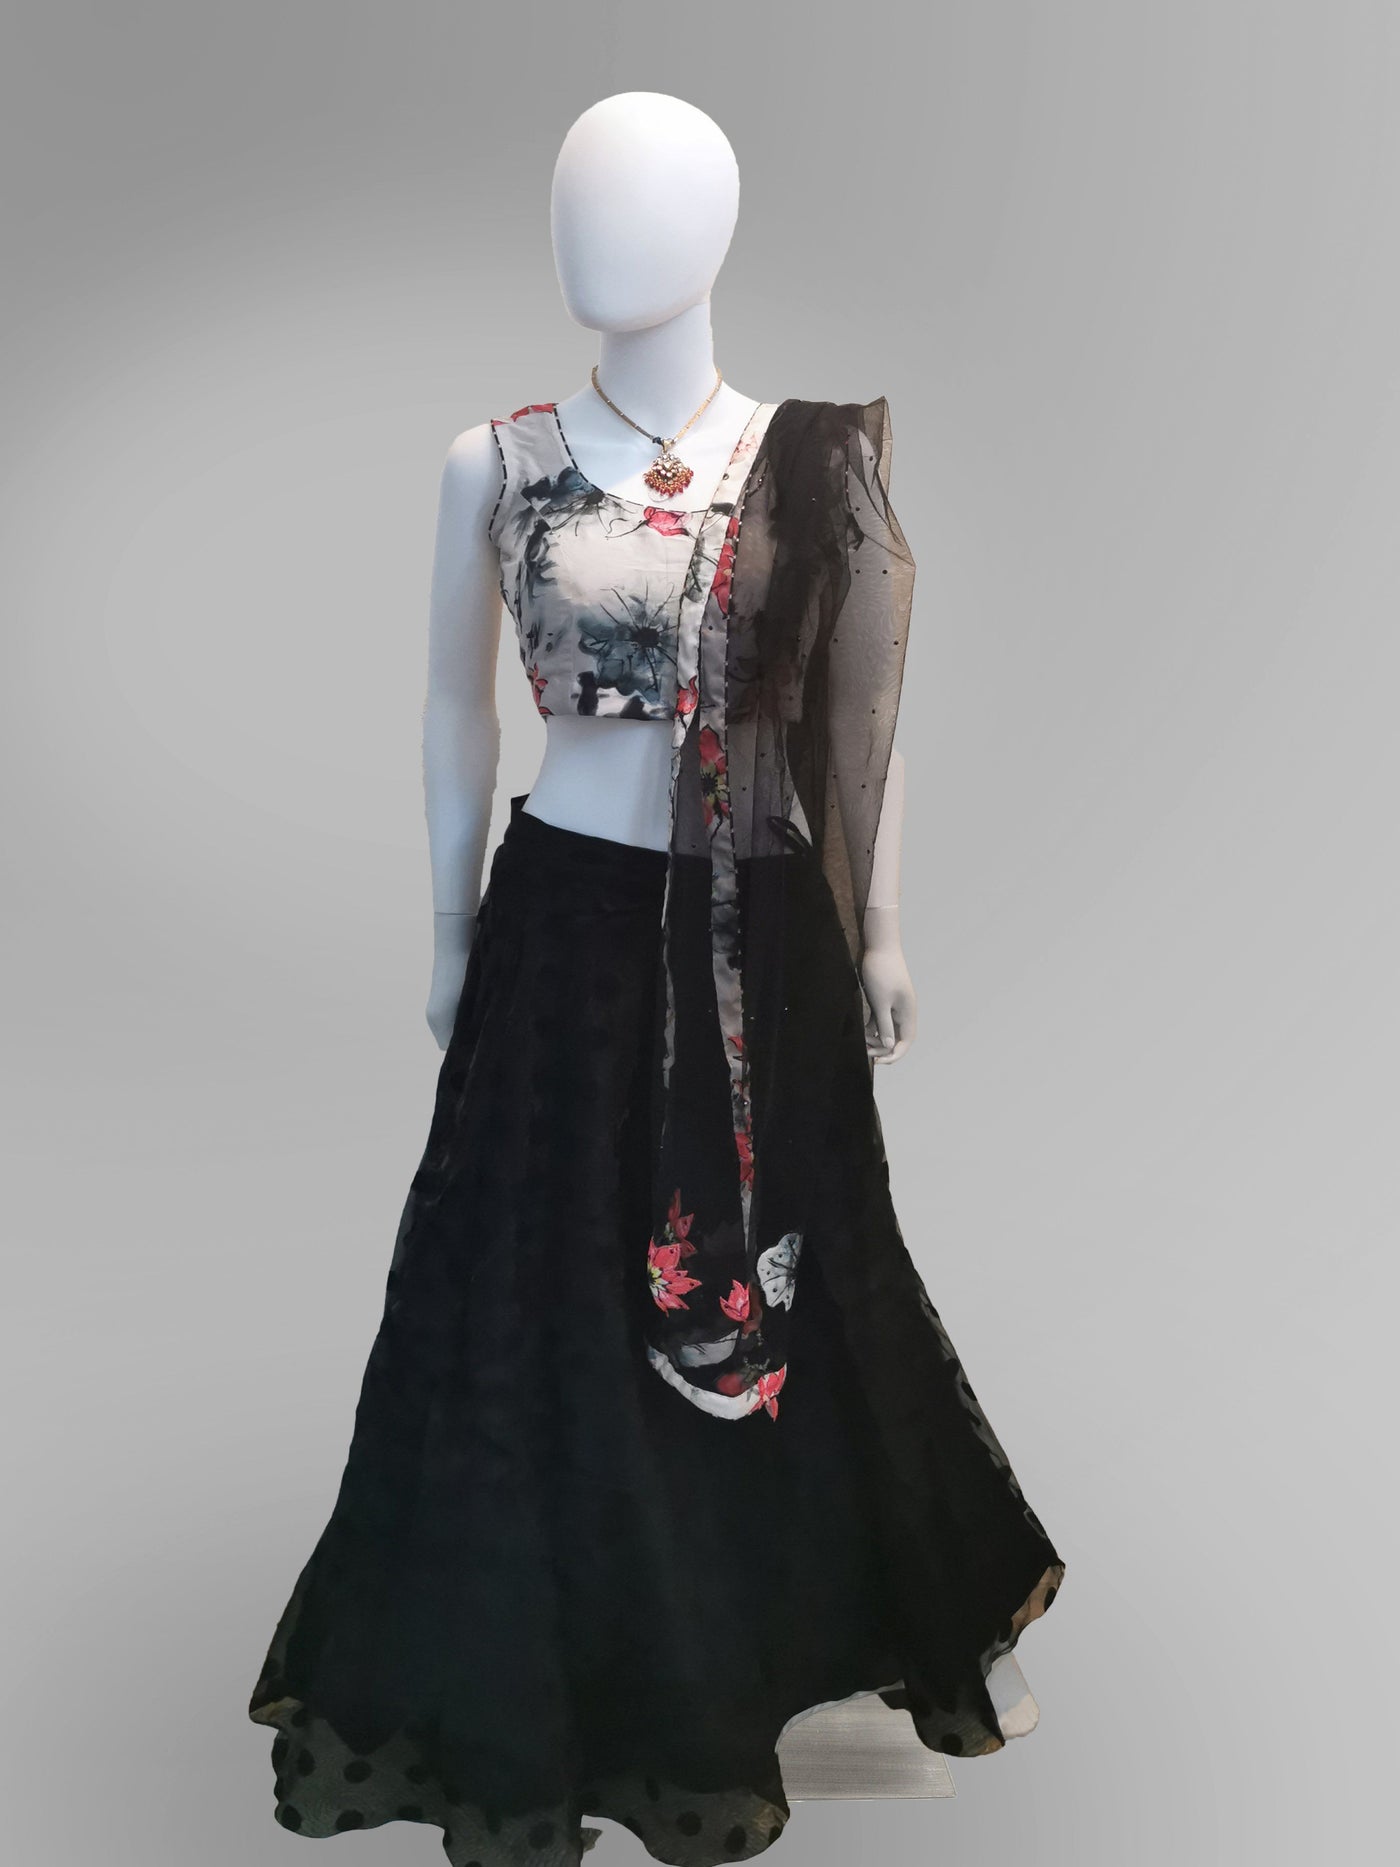 Lehenga in Floral motif and Off-White and Black Scheme - Indian Clothing in Denver, CO, Aurora, CO, Boulder, CO, Fort Collins, CO, Colorado Springs, CO, Parker, CO, Highlands Ranch, CO, Cherry Creek, CO, Centennial, CO, and Longmont, CO. Nationwide shipping USA - India Fashion X